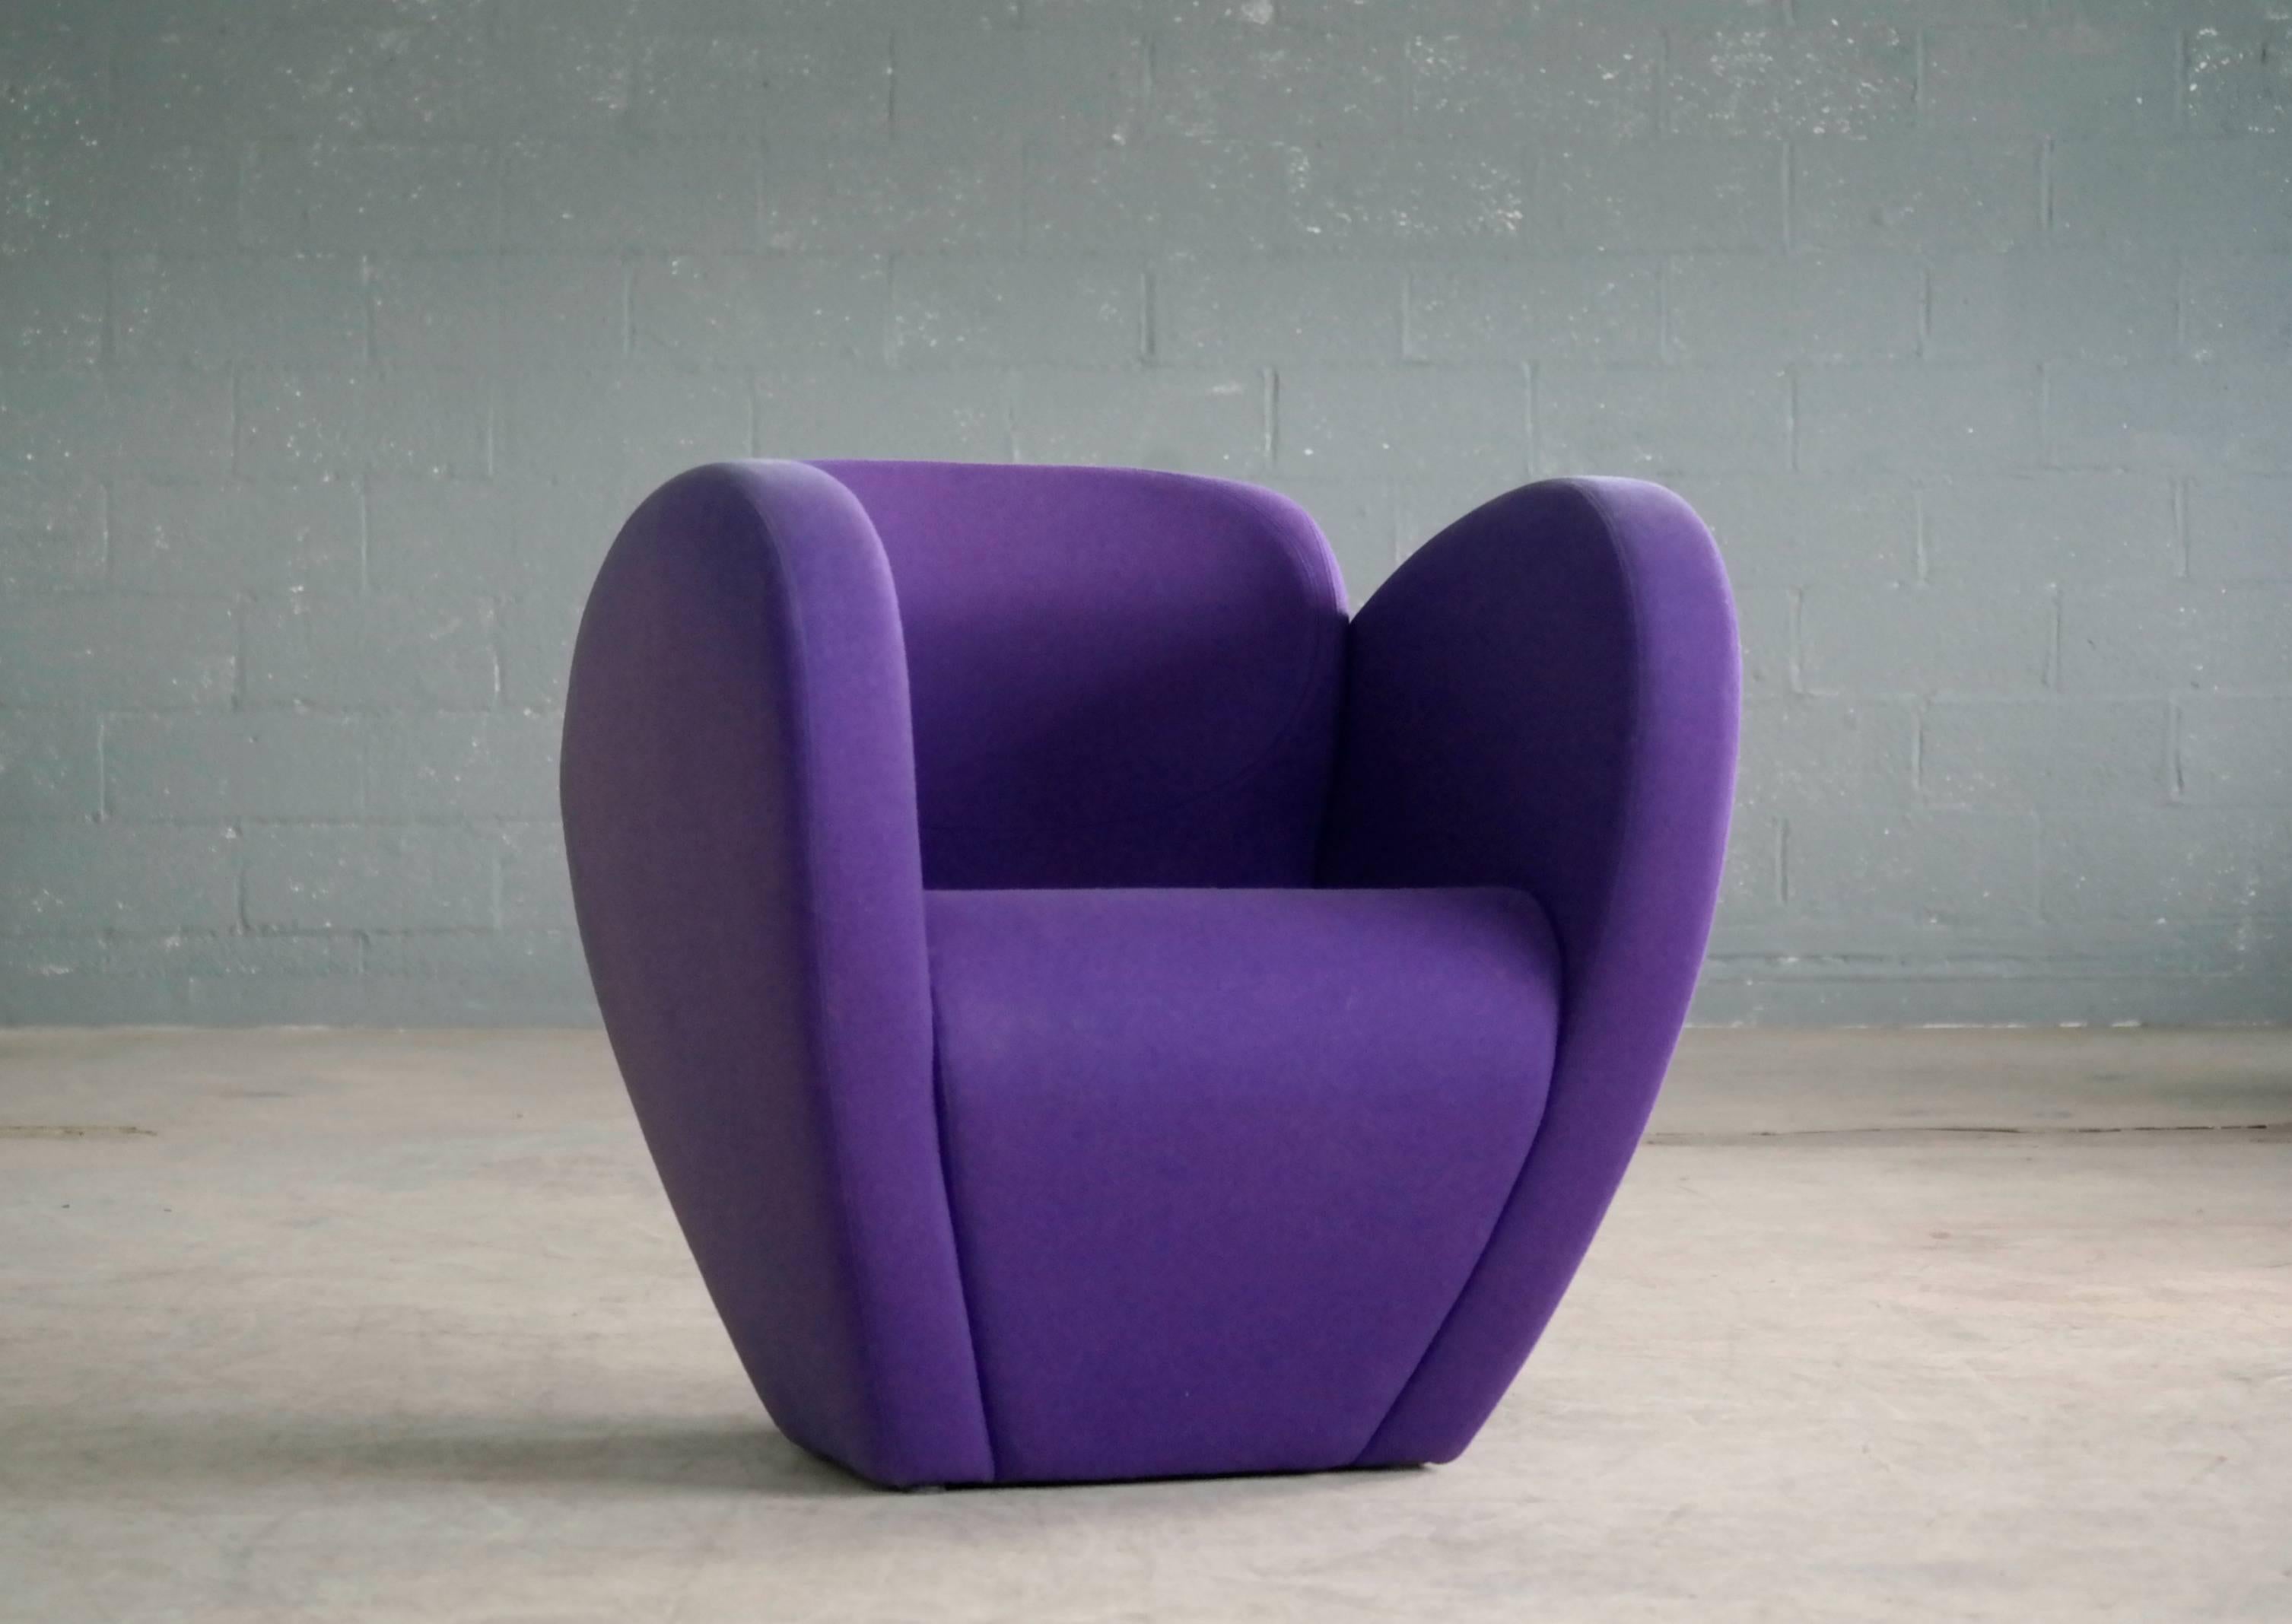 This amazing armchair from the Spring collection was designed by the famous Ron Arad in 1991 for Moroso of Italy. Frame upholstered with polyurethane foam covered in a soft purple wool felt fabric. Extraordinary lines from all angles and very